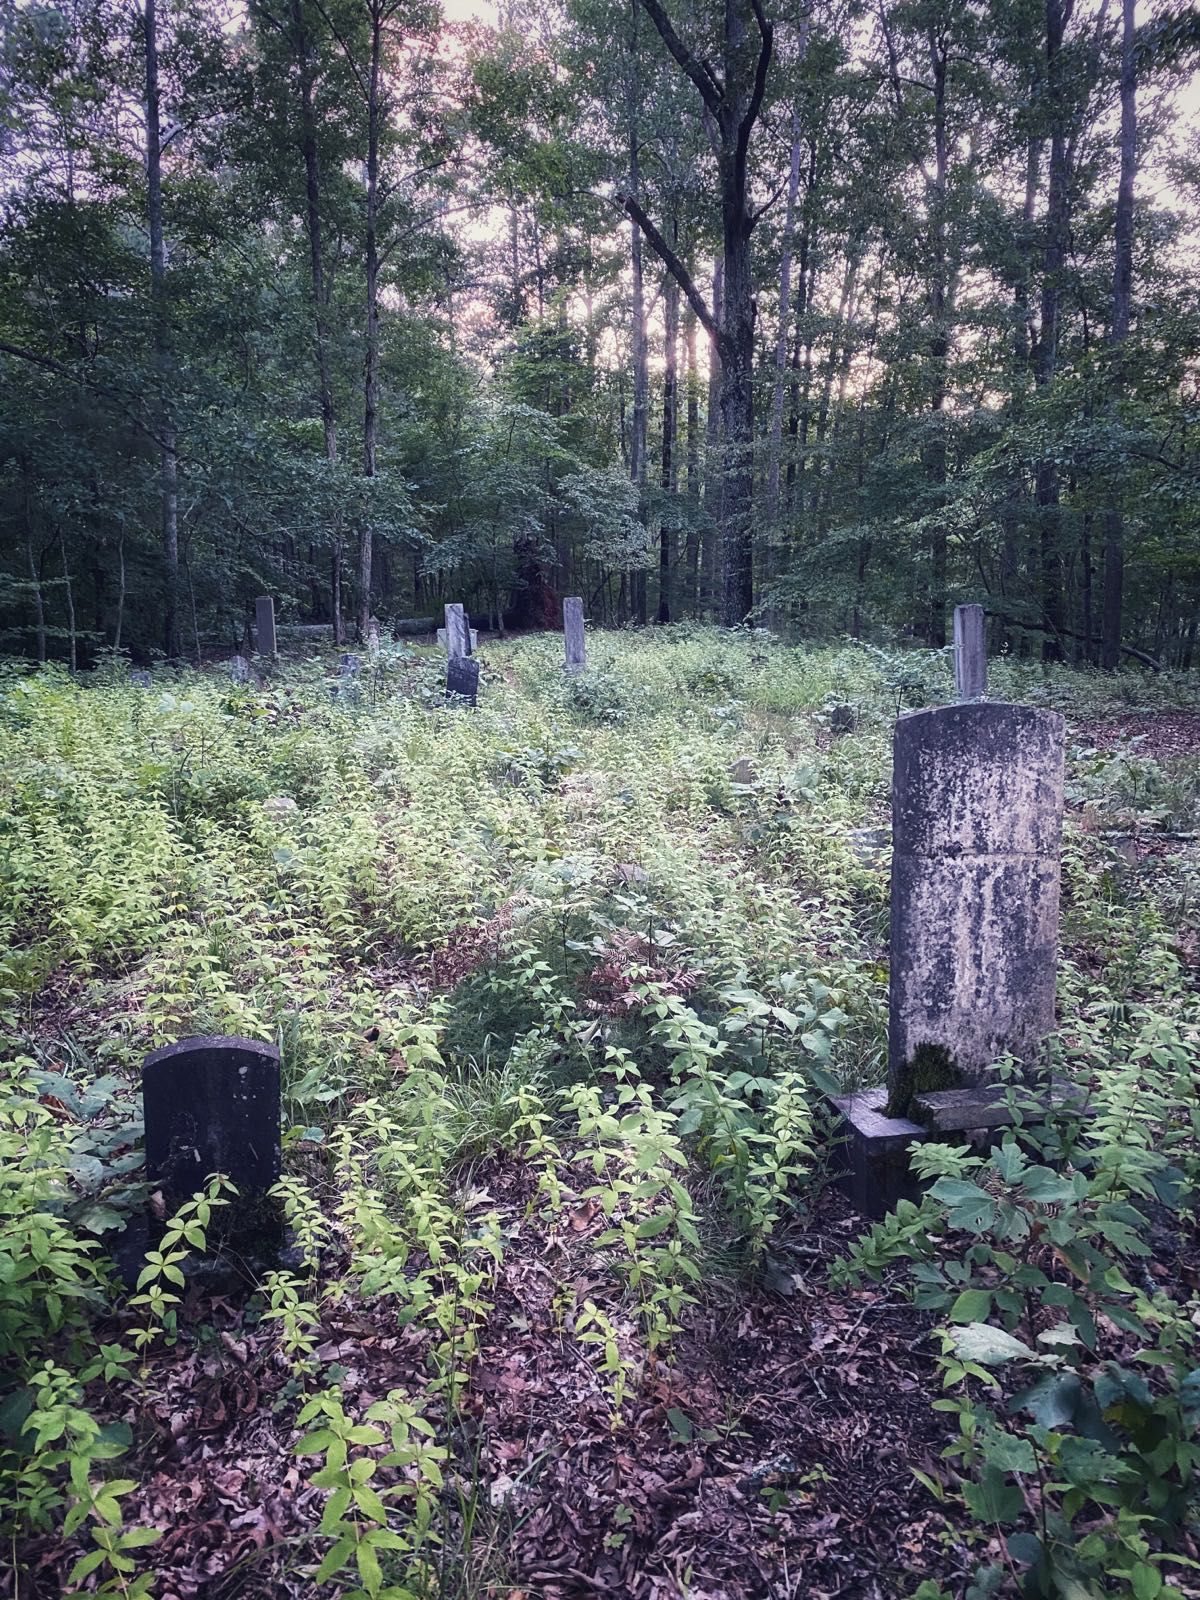 Came across an abandoned 1850s cemetery above Upper Stamp campground. Quite the lonely place.